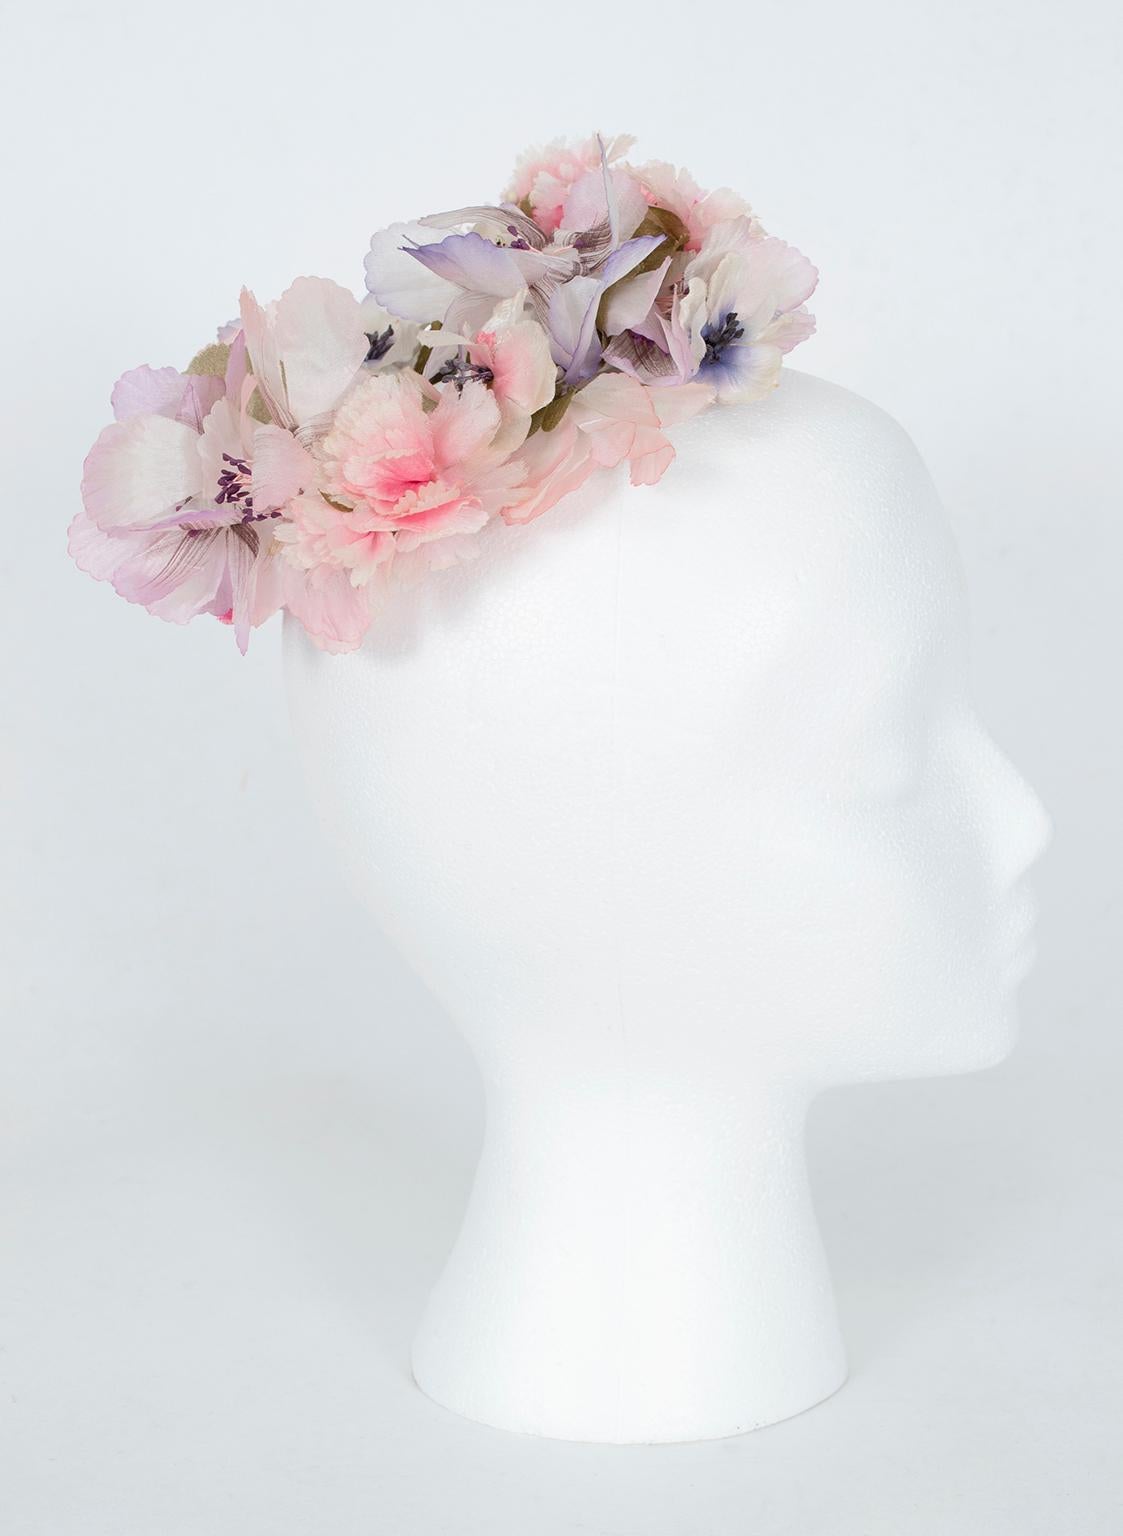 If a traditional wedding veil or cocktail hat is not your style, consider a floral coronet: slightly more bohemian in flavor, they remain ultra-feminine and impart a wood sprite, “Midsummer Night’s Dream” bent to any occasion.

Silk floral hair